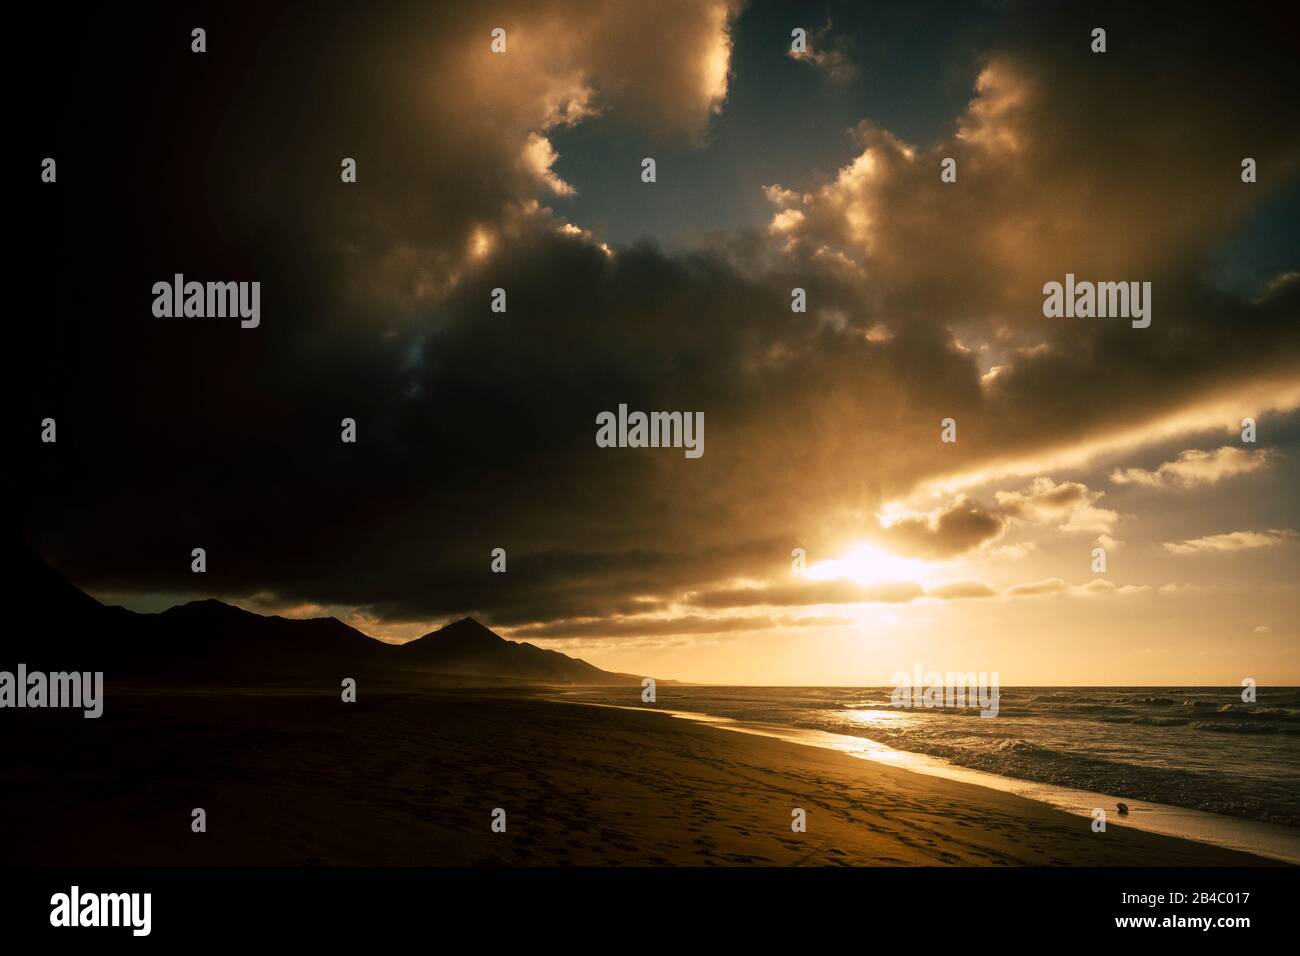 Dramatic dark shadows sunset at the beach with black mountains in background - sun and ocean for adventure concept - scenic landscape and beautiful sky with clouds Stock Photo